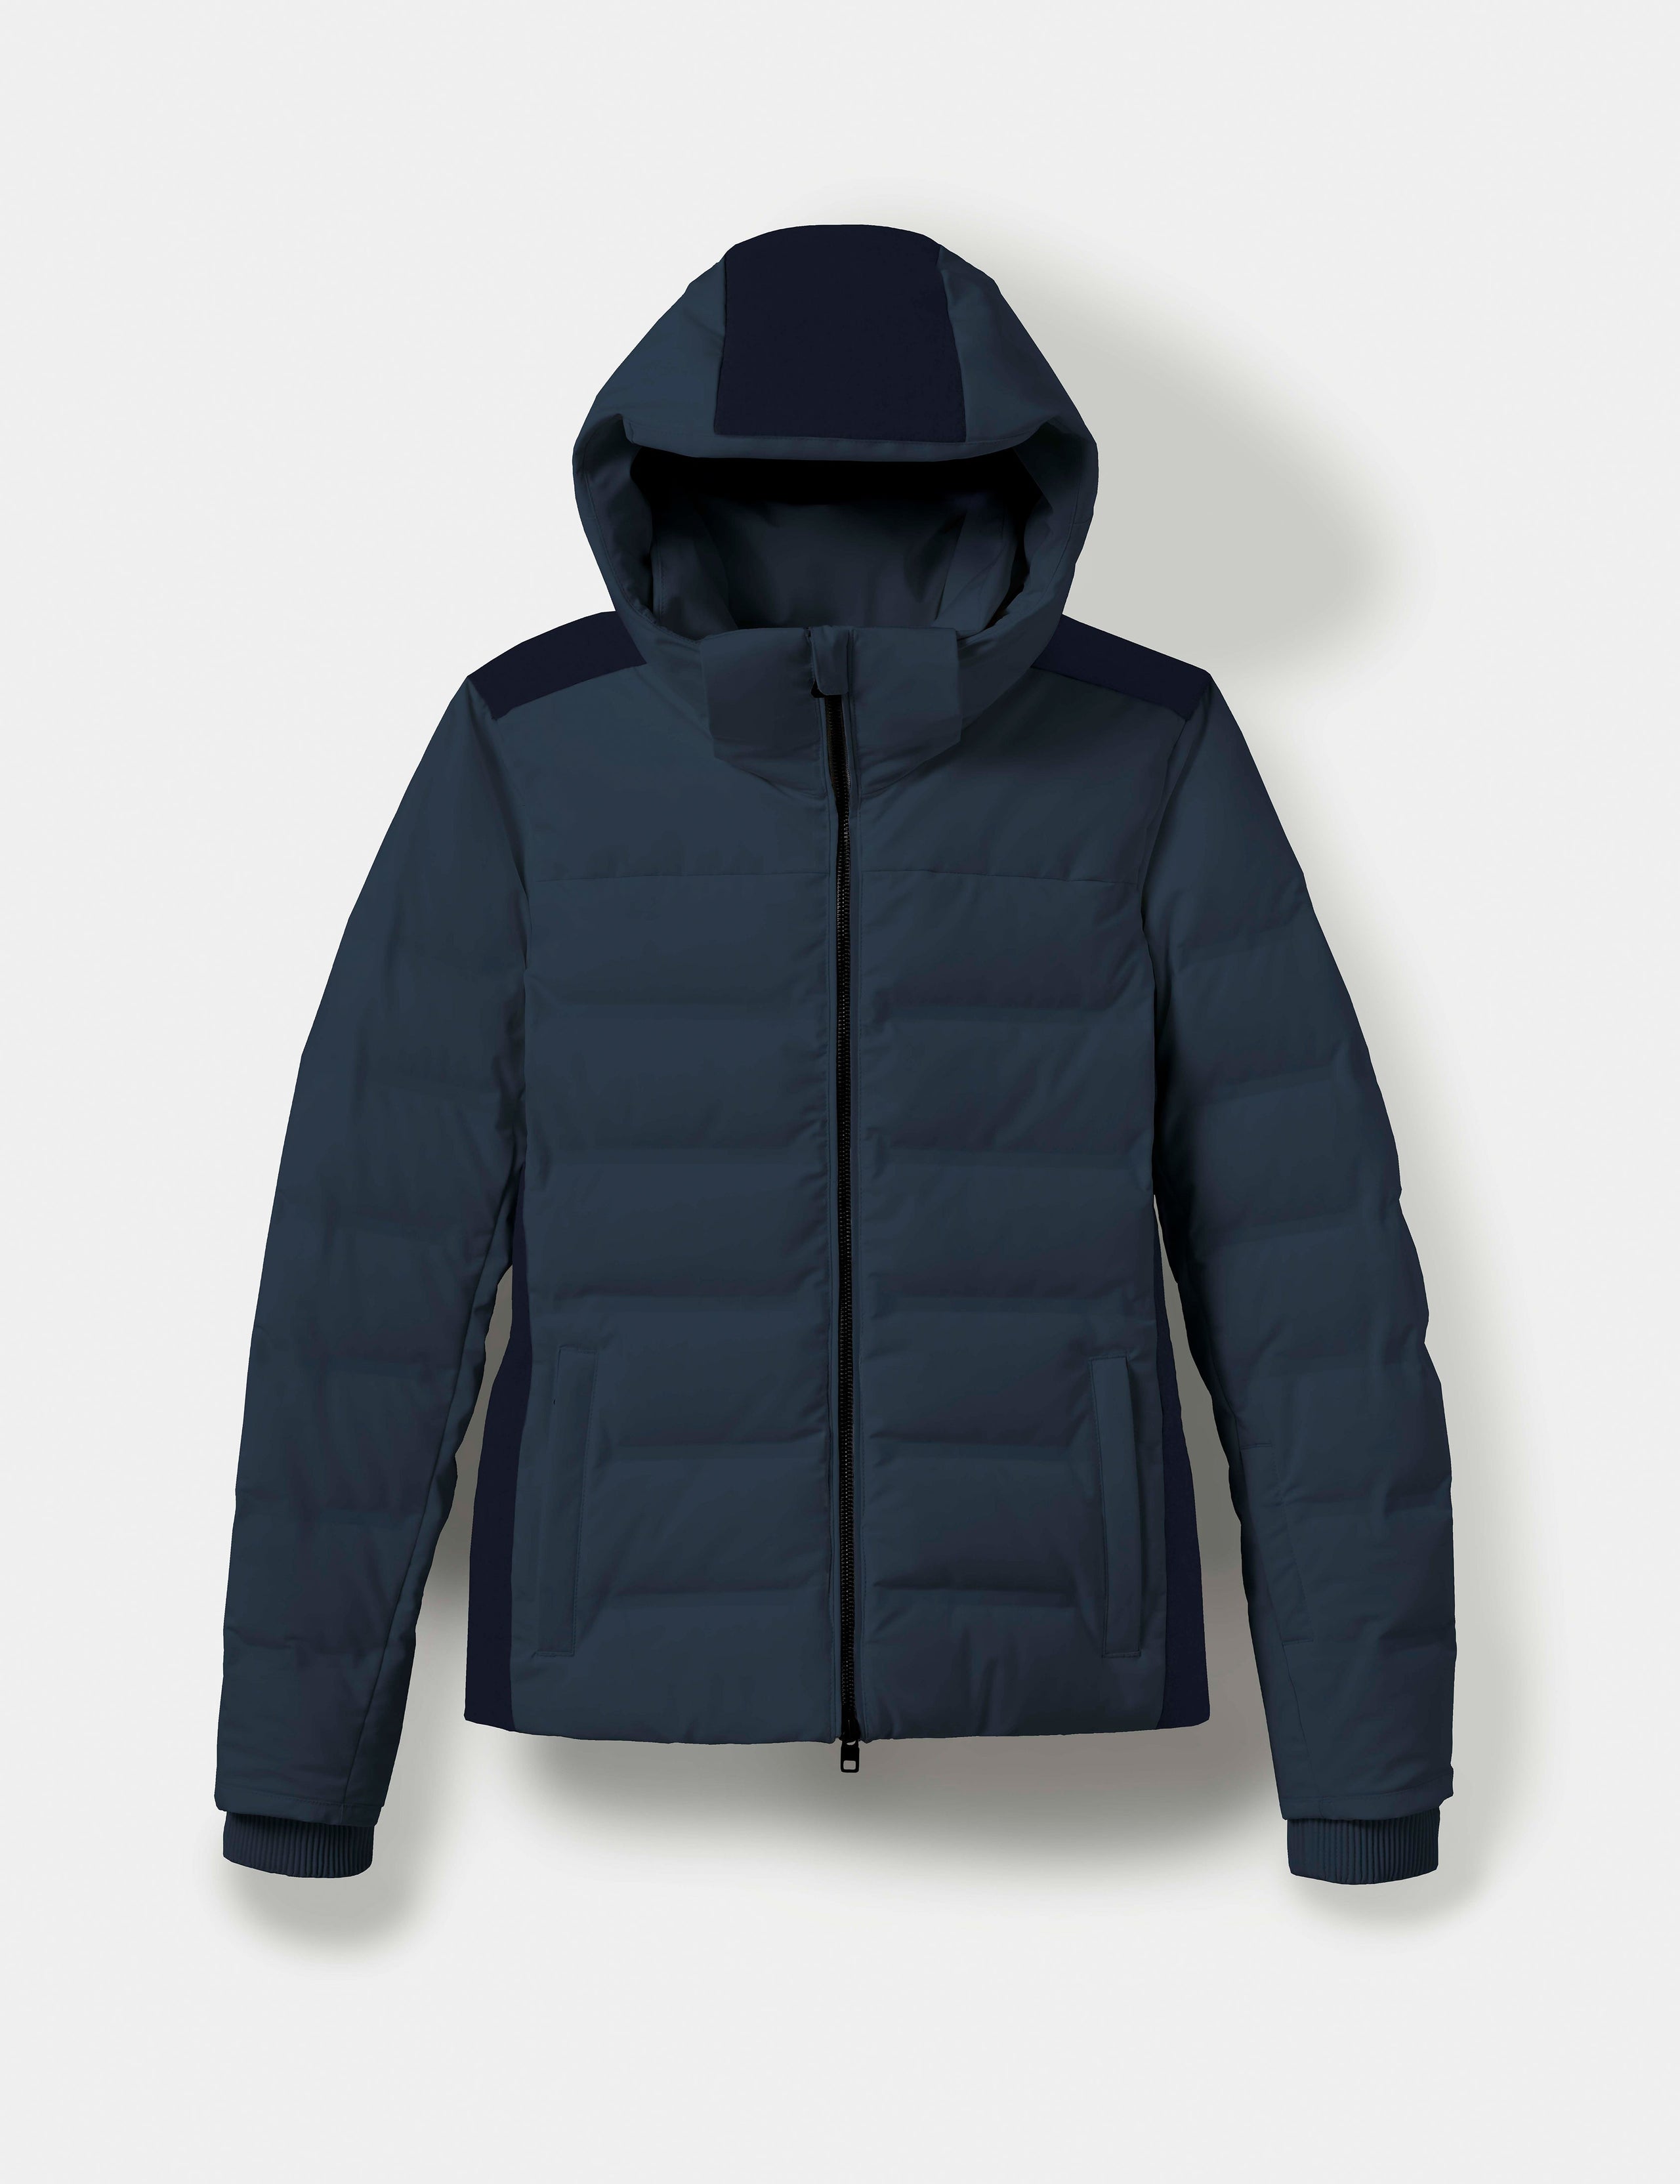 dark blue snow jacket from AETHER Apparel